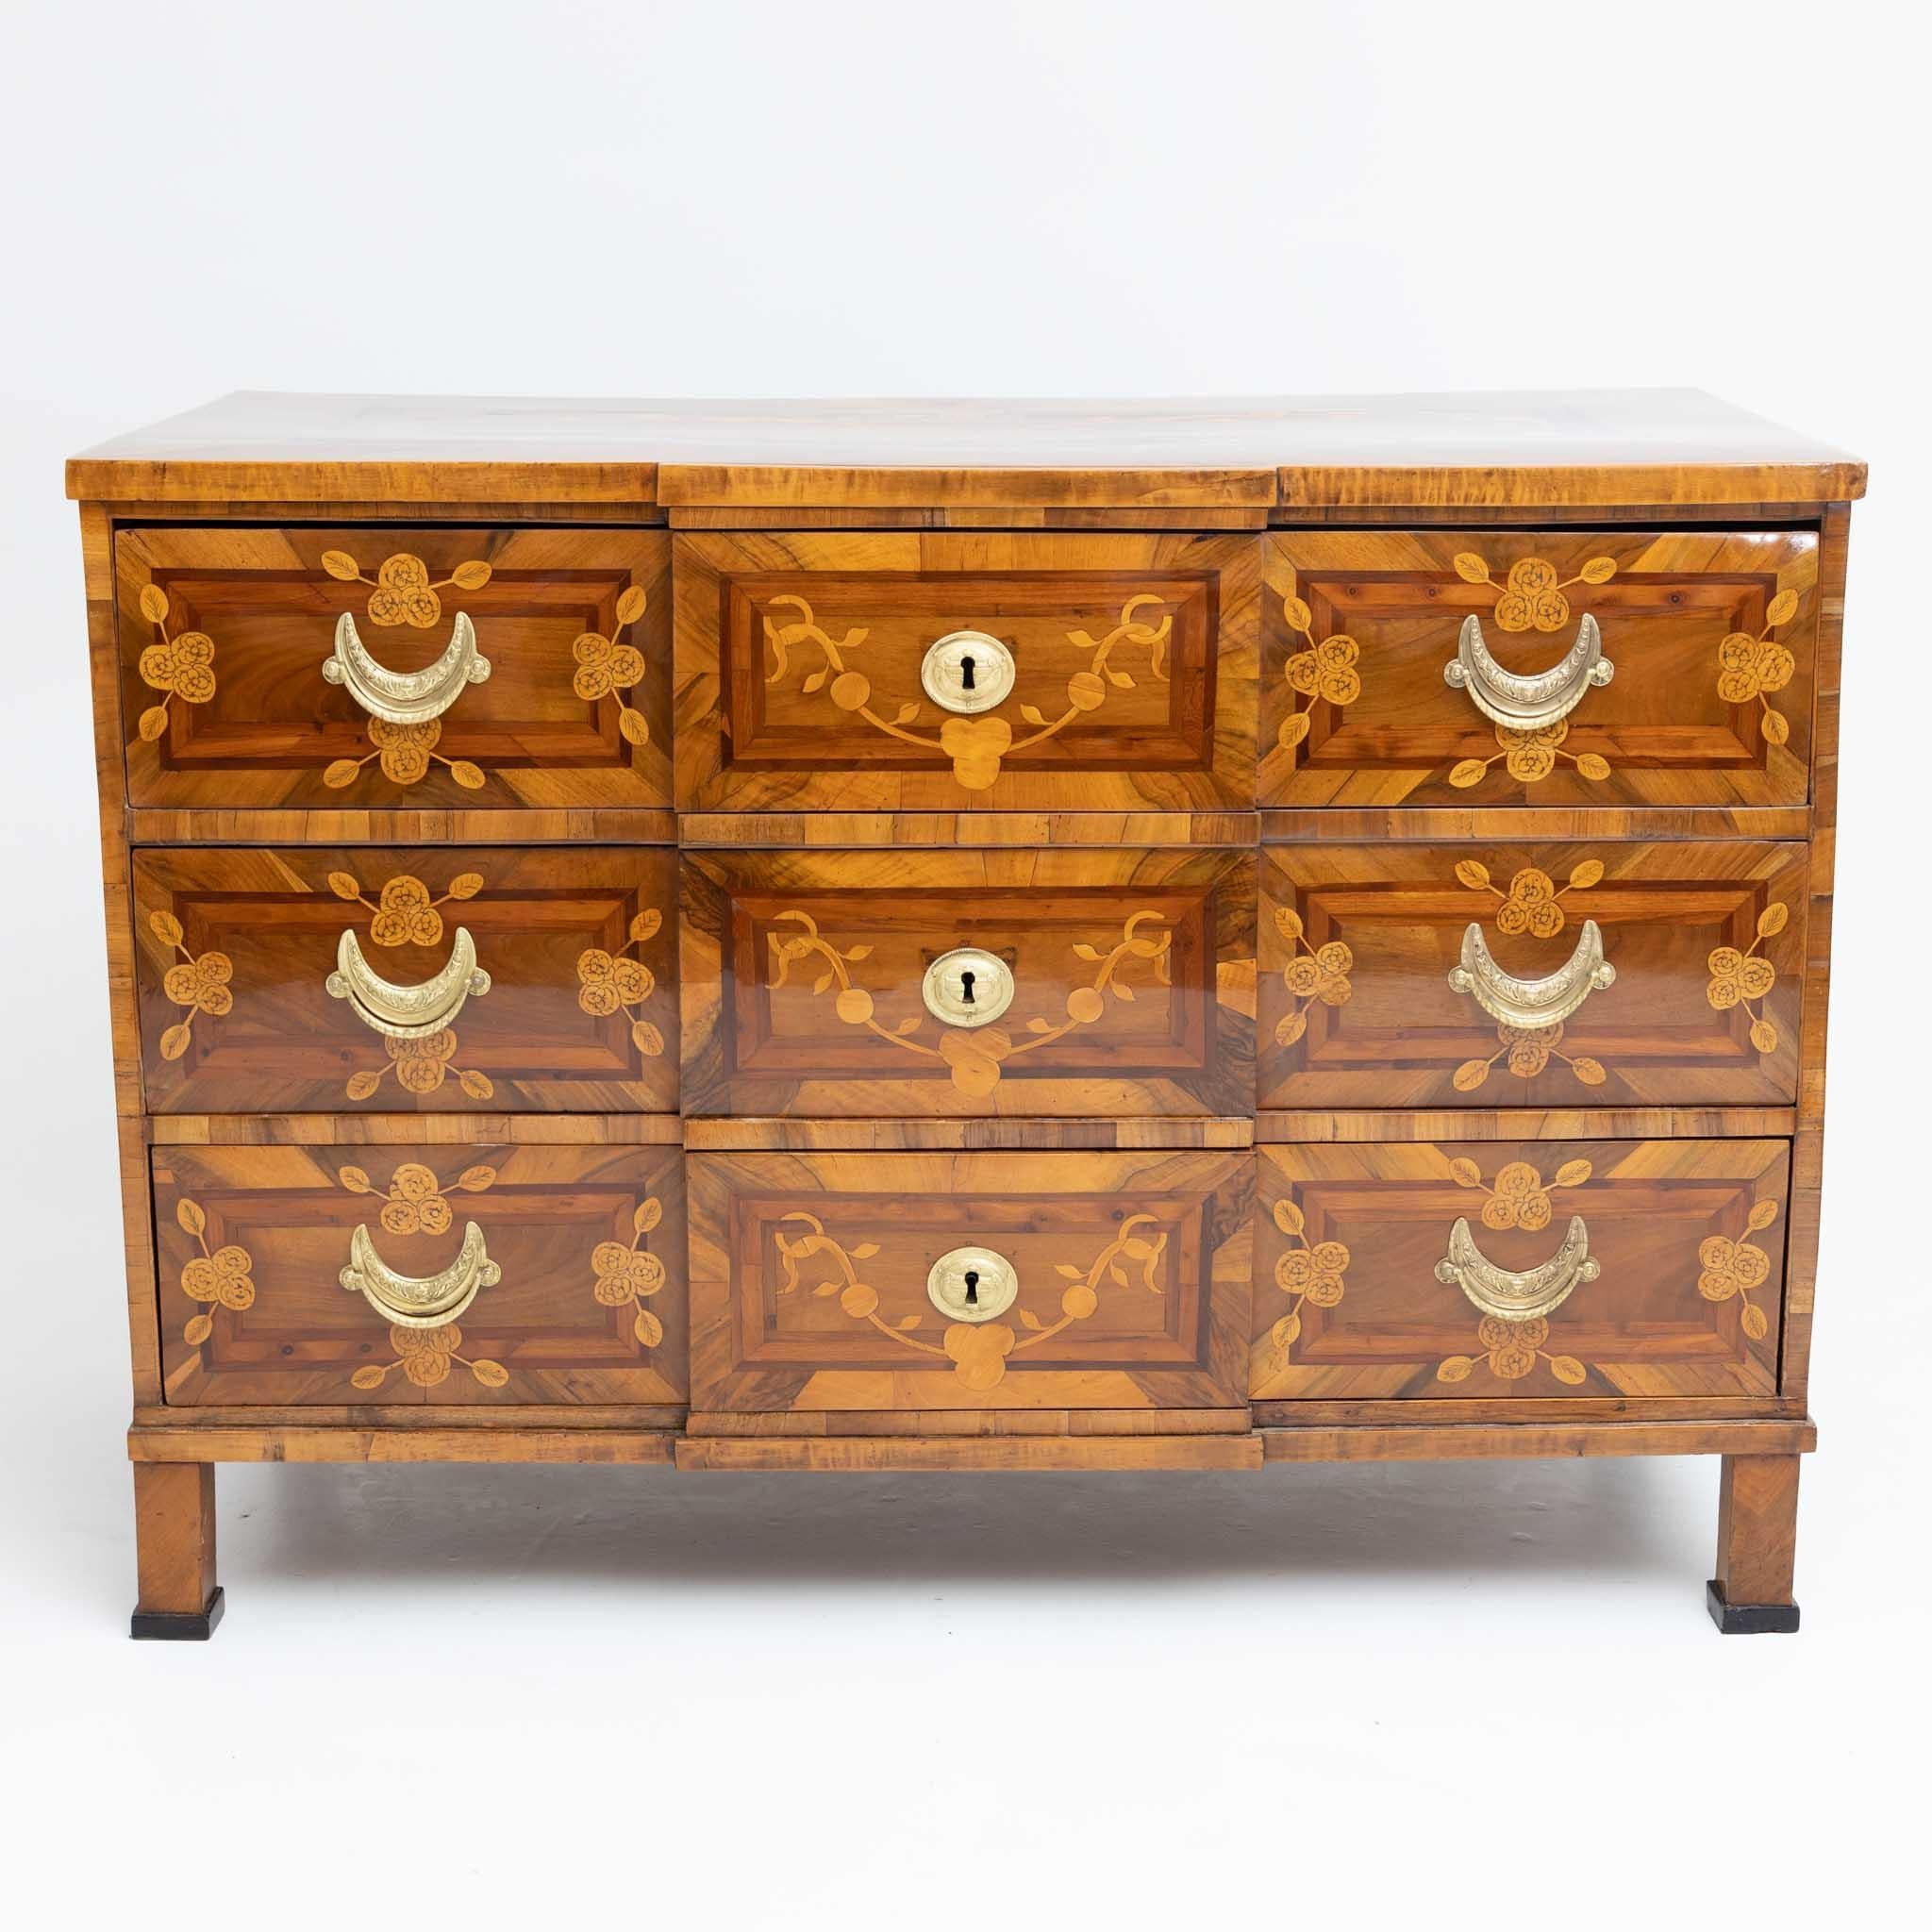 Brass Louis Seize Marquetry Chest of Drawers, Walnut veneered, Late 18th Century For Sale